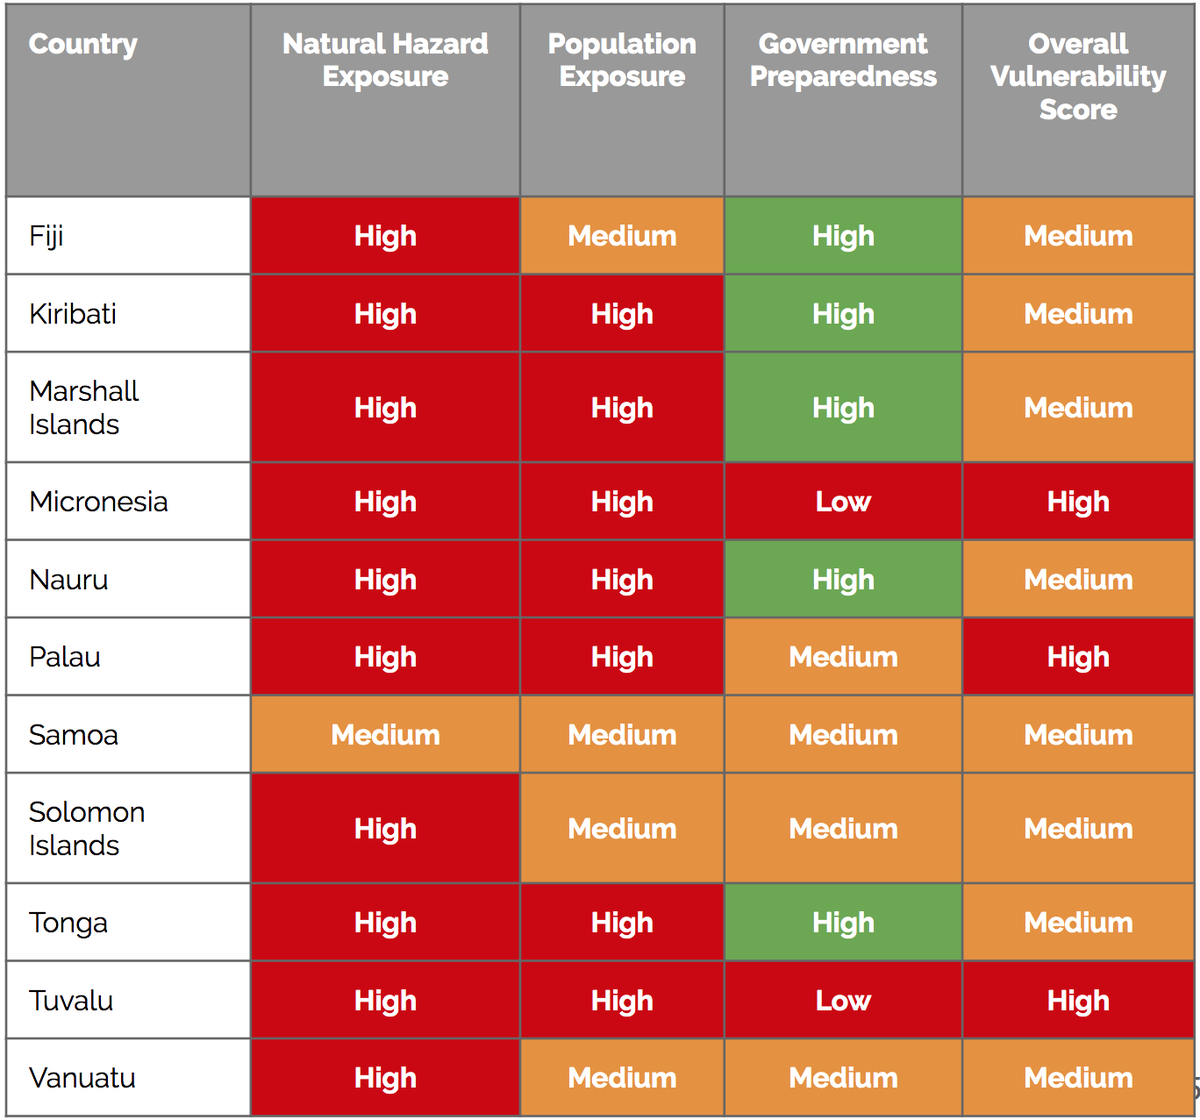 In our second report on disaster risk reduction, we code relative climate vulnerability in the region including 3 dimensions (exposure, population at risk, and government preparedness). 4/  http://sites.utexas.edu/climatesecurity/files/2020/05/LBJ_Oceania_DRR.pdf